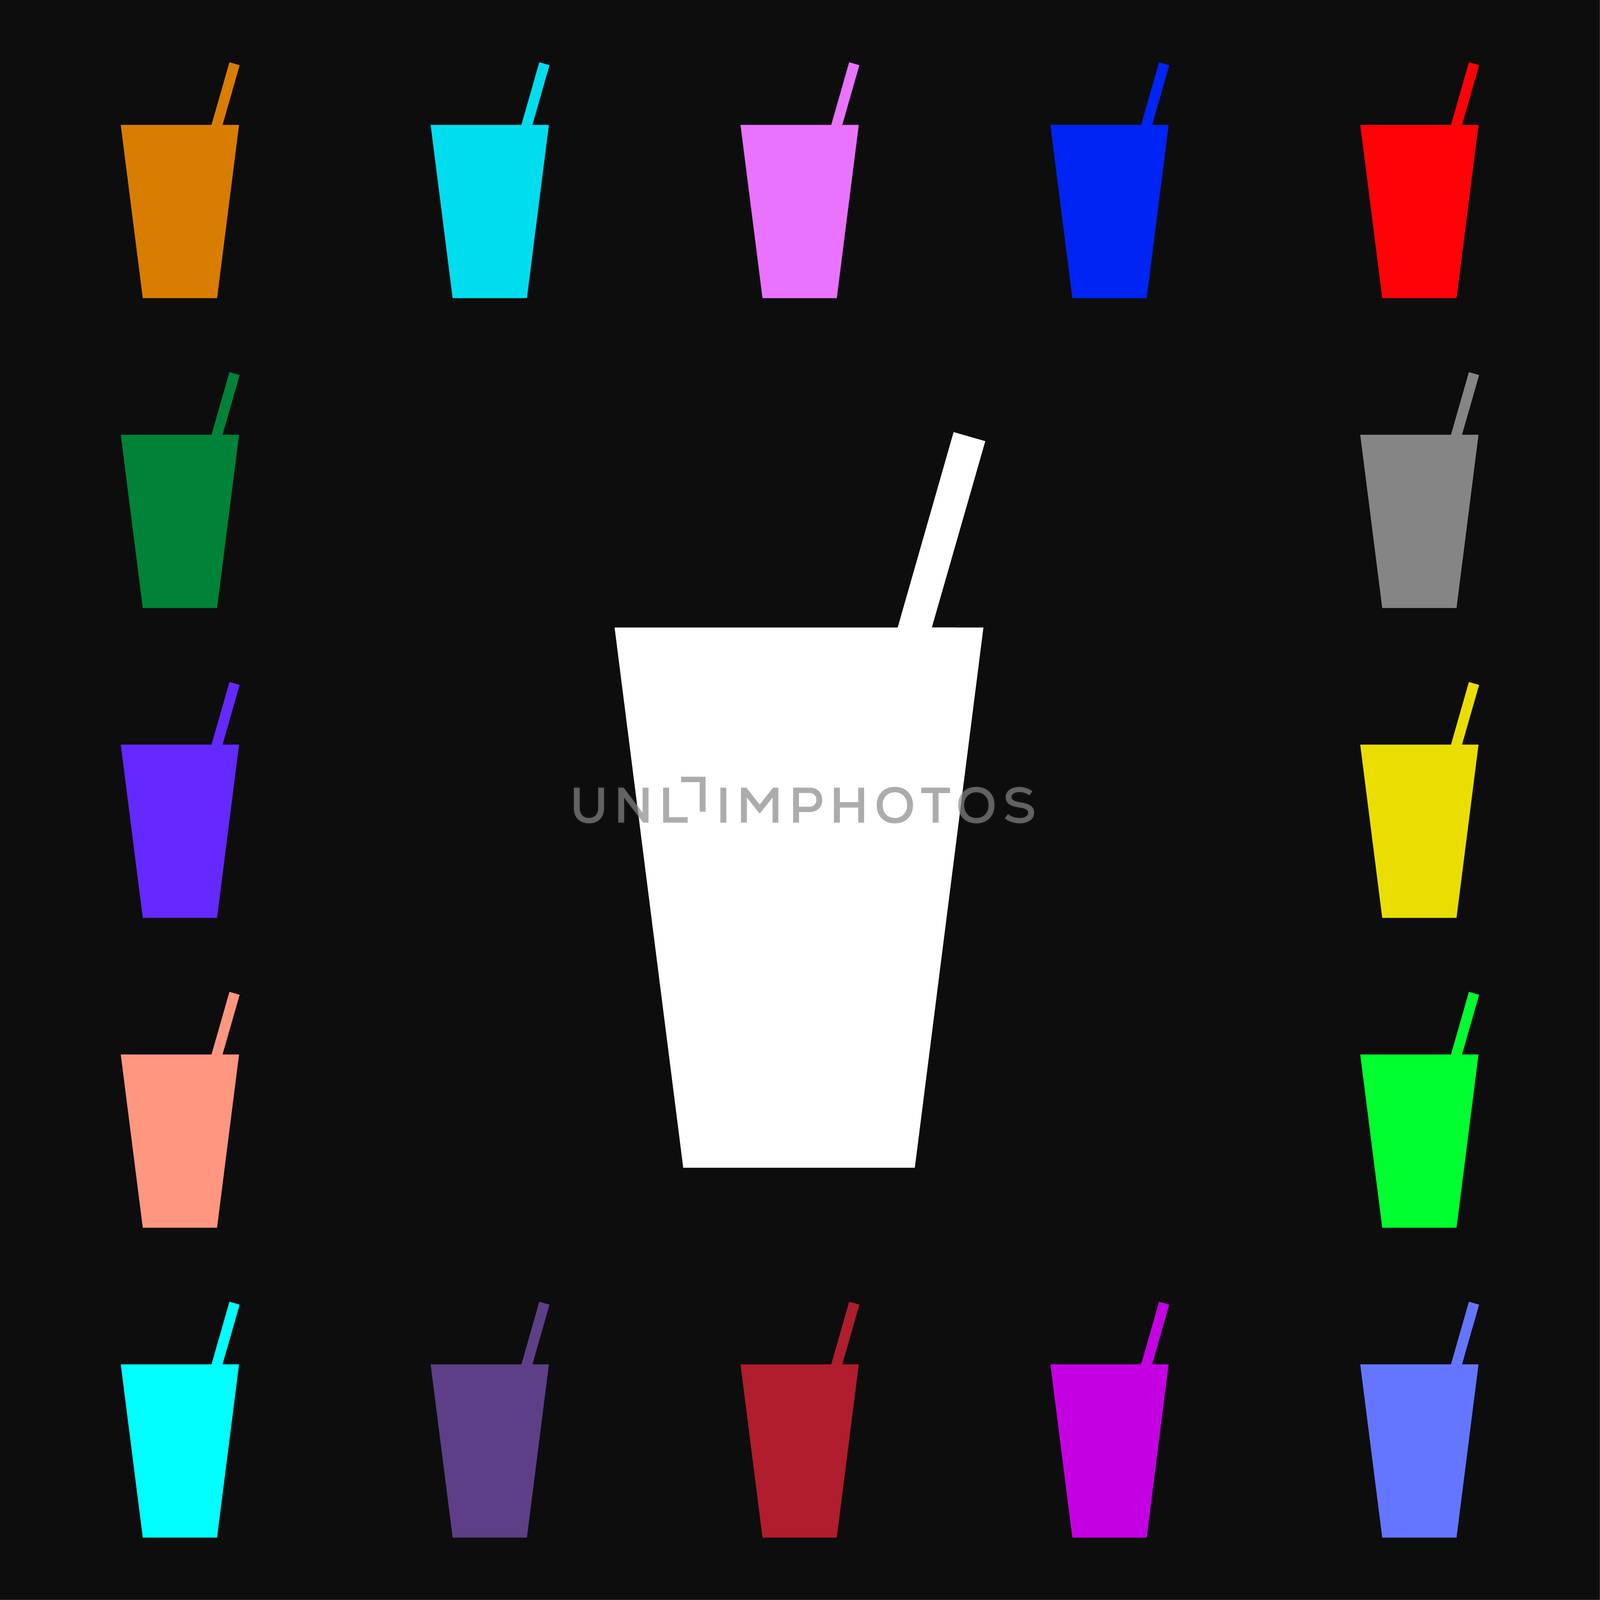 cocktail icon sign. Lots of colorful symbols for your design. illustration